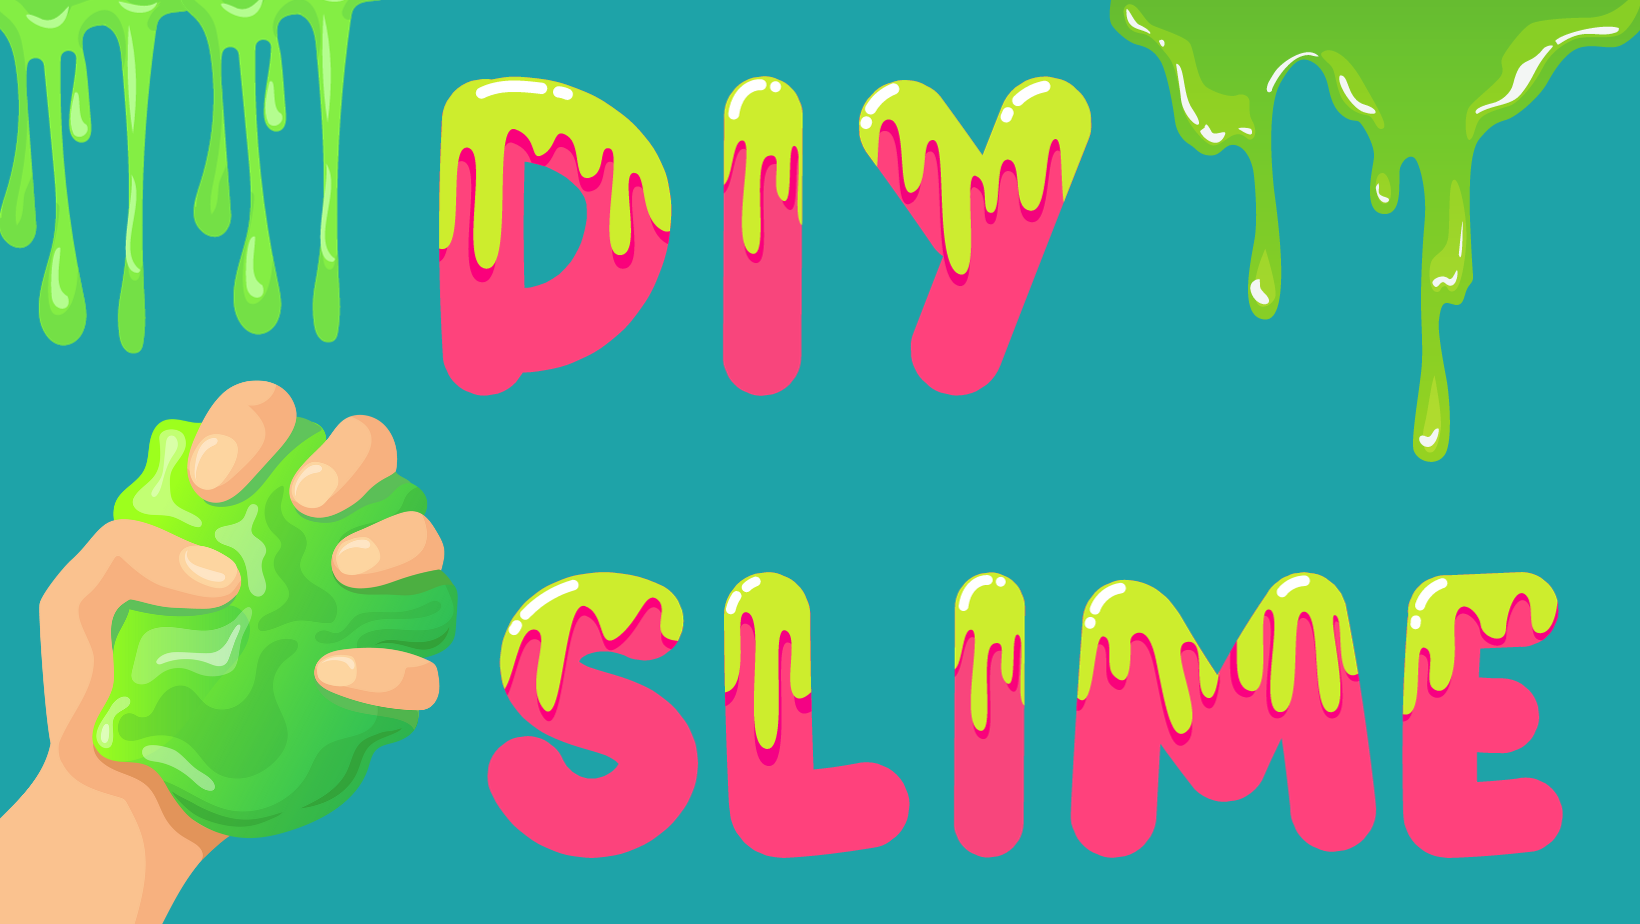 DIY Slime text dripping with green slime